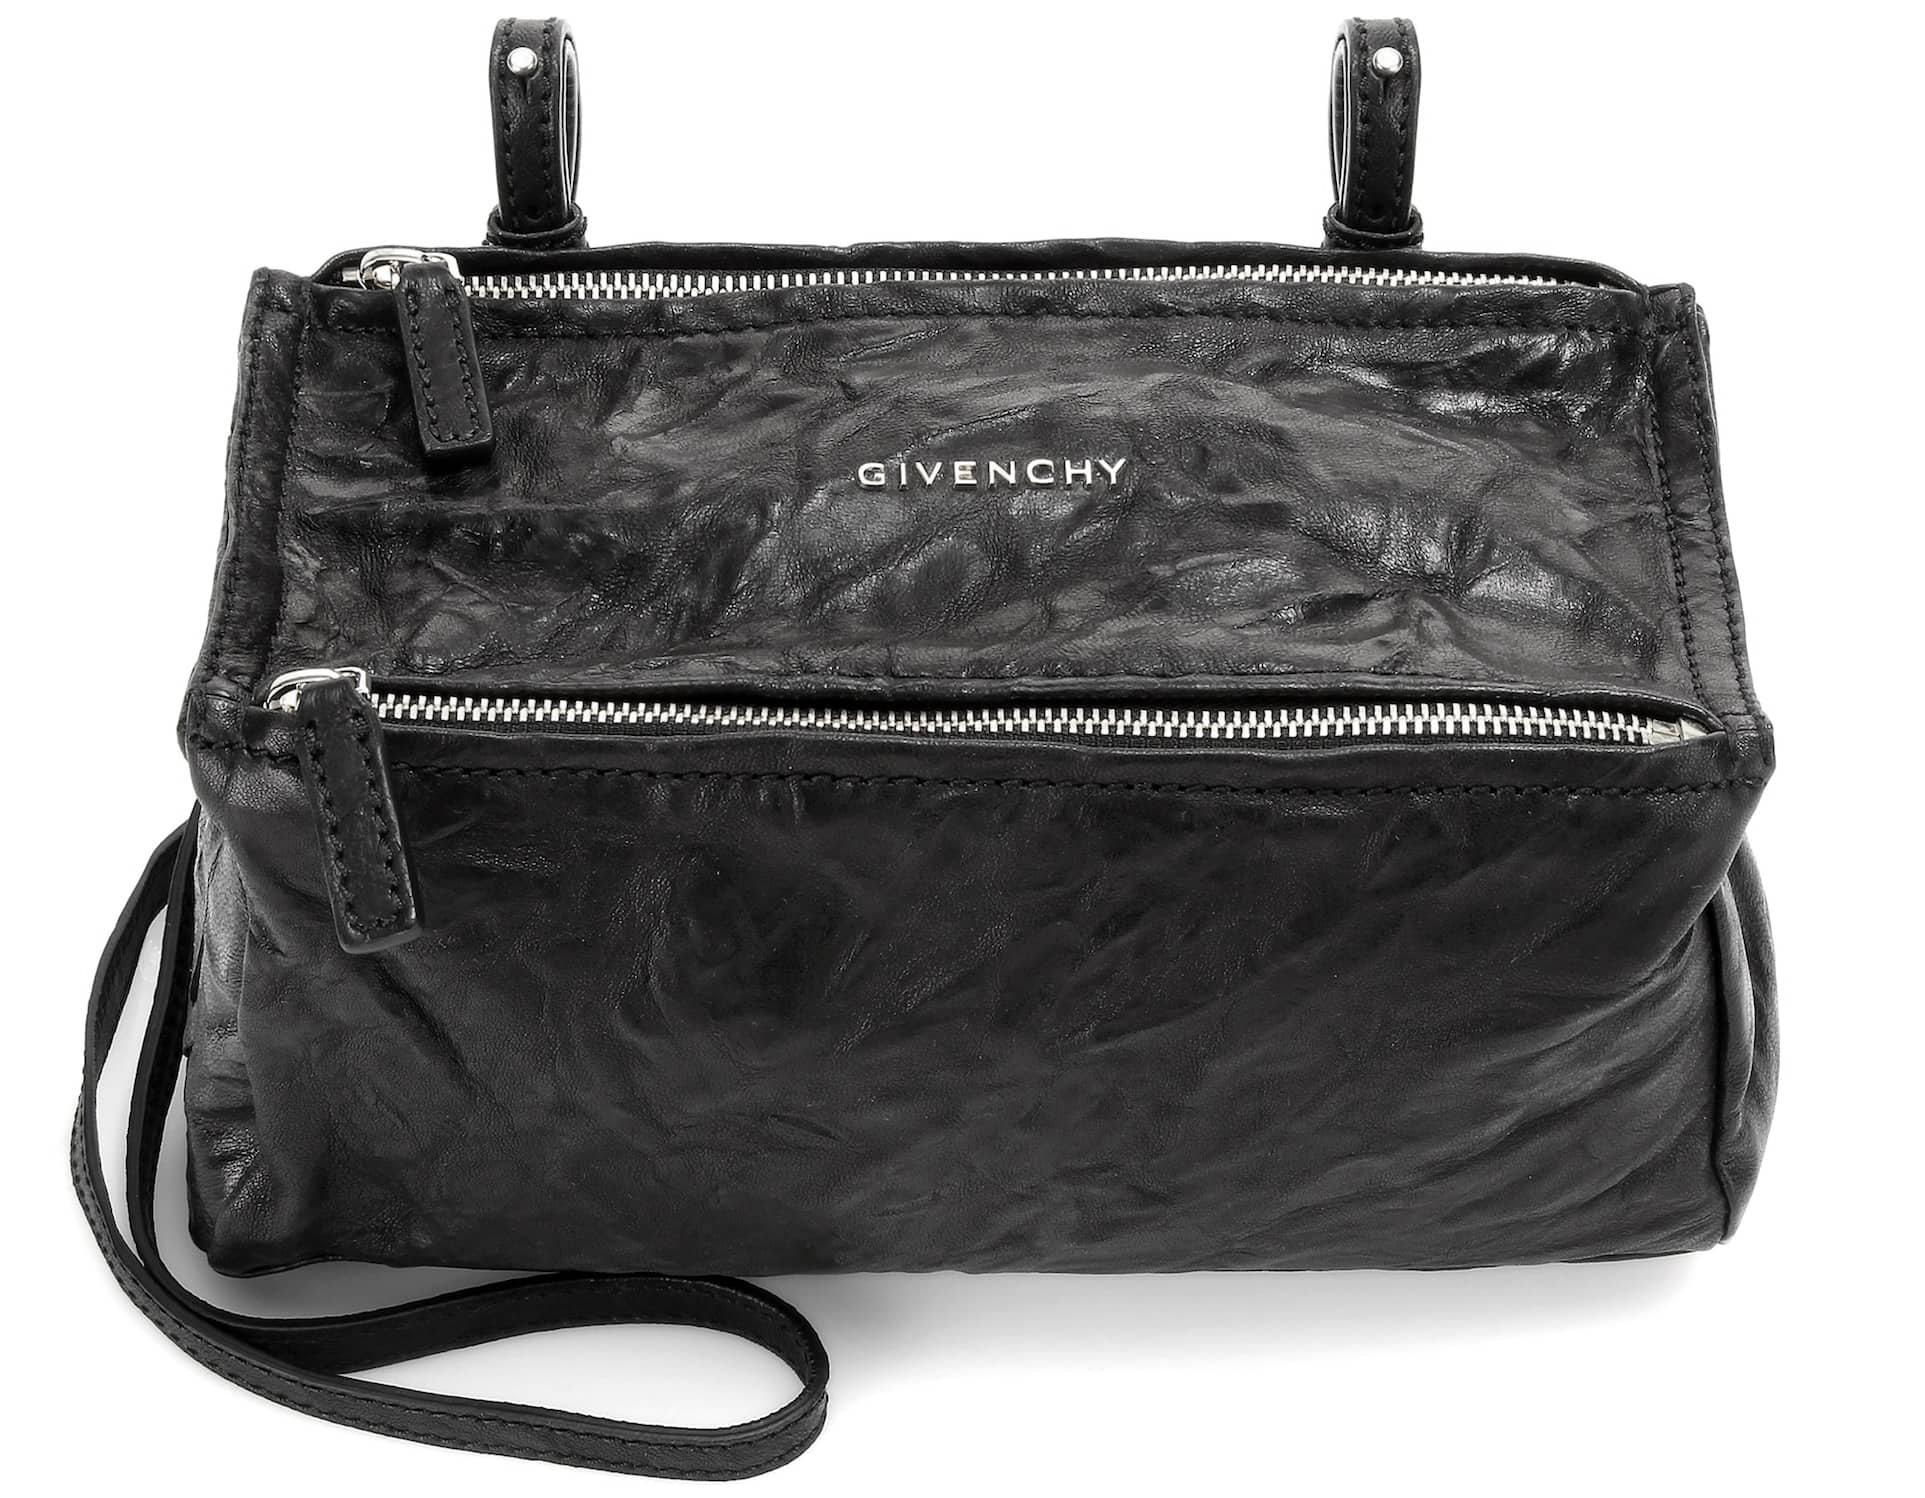 One of Givenchy's most famous bag silhouette, the Pandora is crafted from textured black leather and features an architectural style finished with double zips and a silver-toned logo